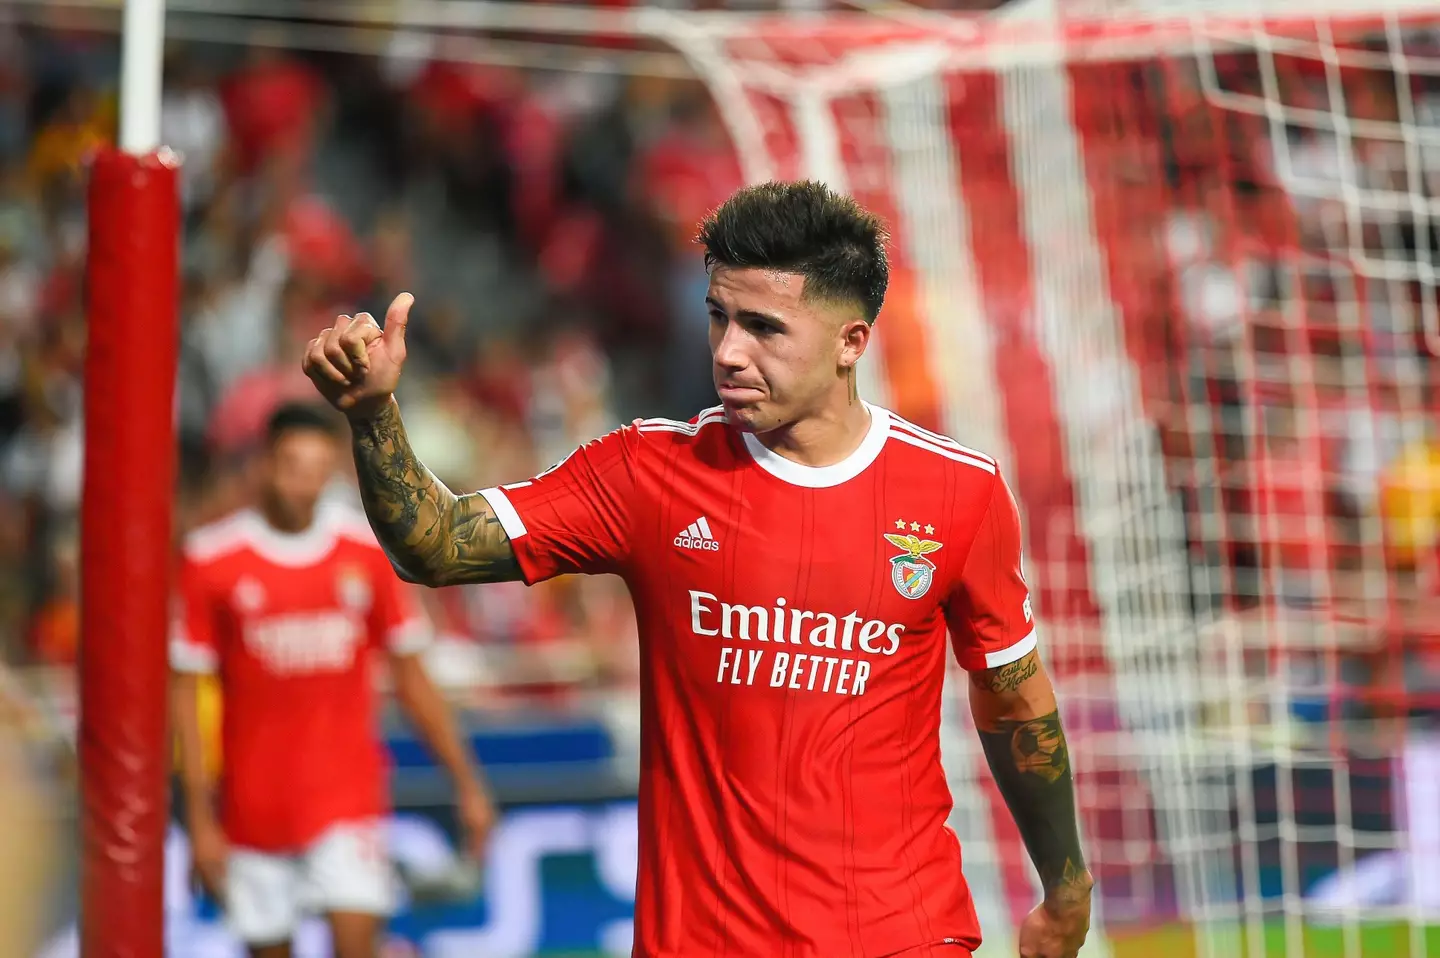 Fernandez is attracting interest from Benfica (Image: Alamy)